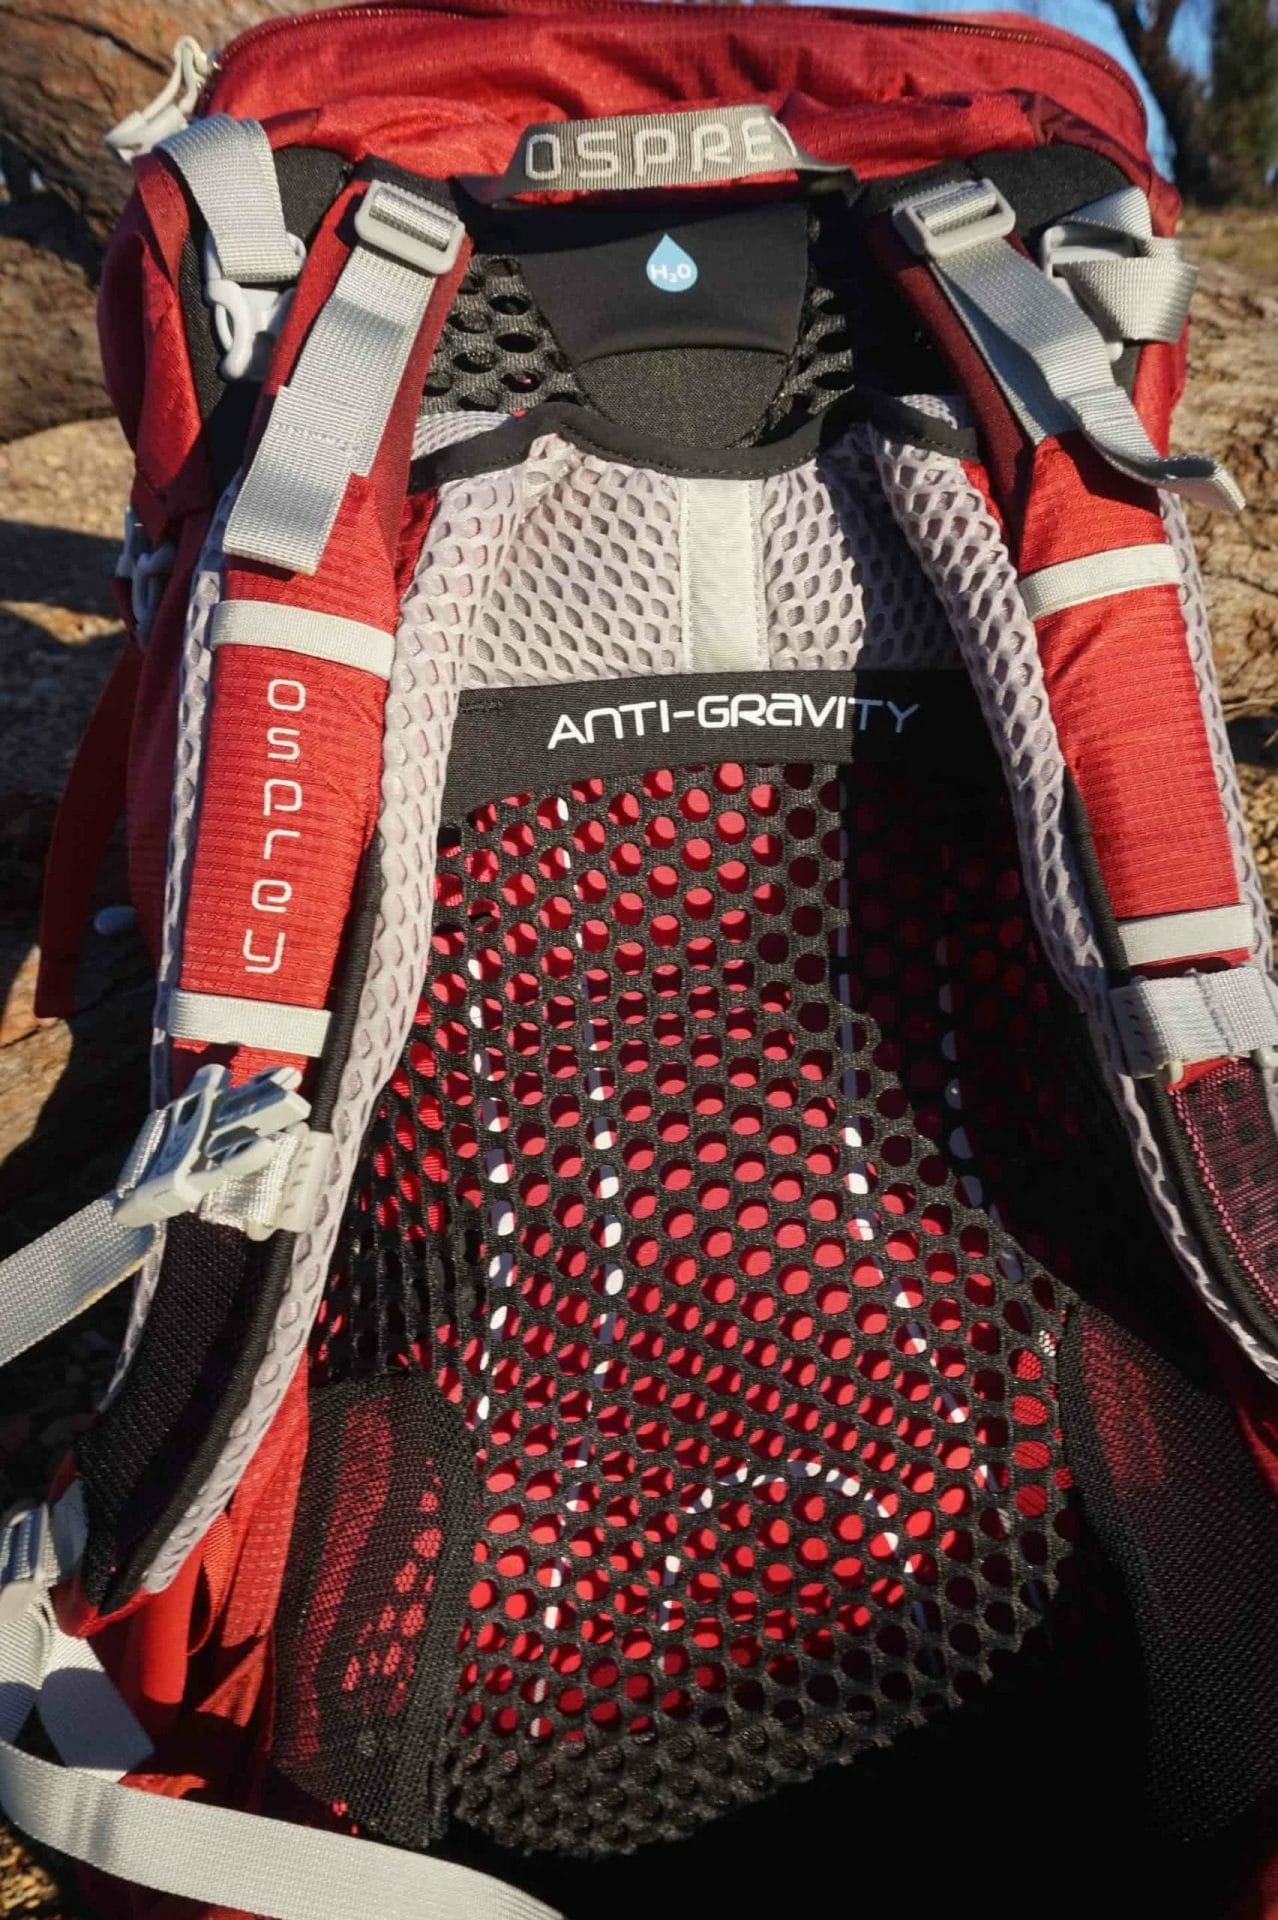 Osprey Aura AG 65 // Gear Review, Amy Fairall, hiking pack, anti-gravity mesh